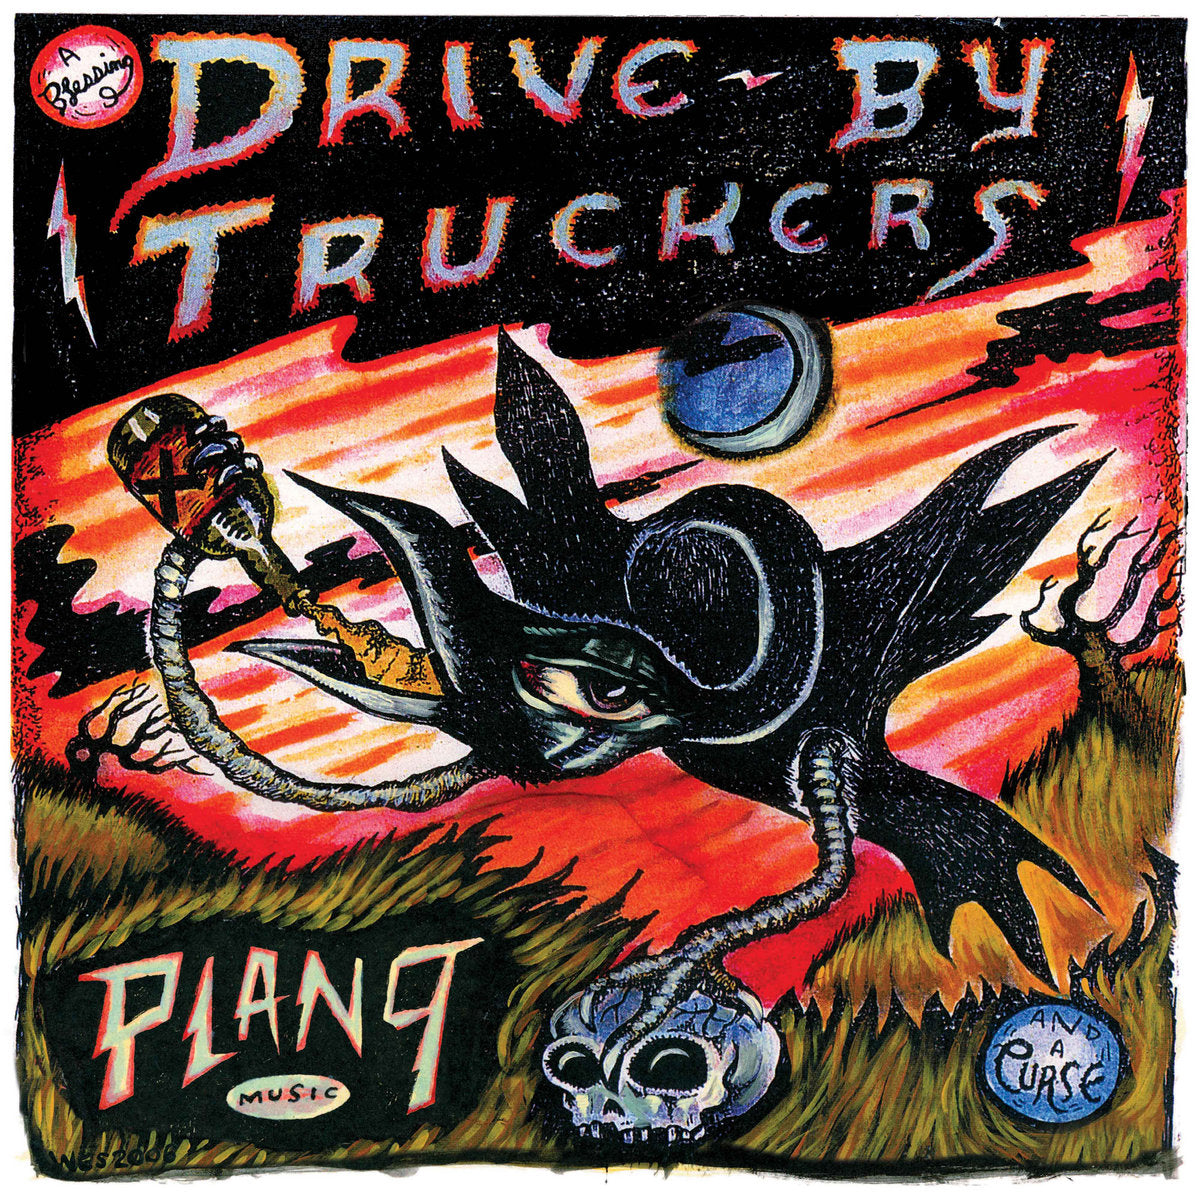 DRIVE BY TRUCKERS - Plan 9 Records July 13, 2006 - 2CD Set